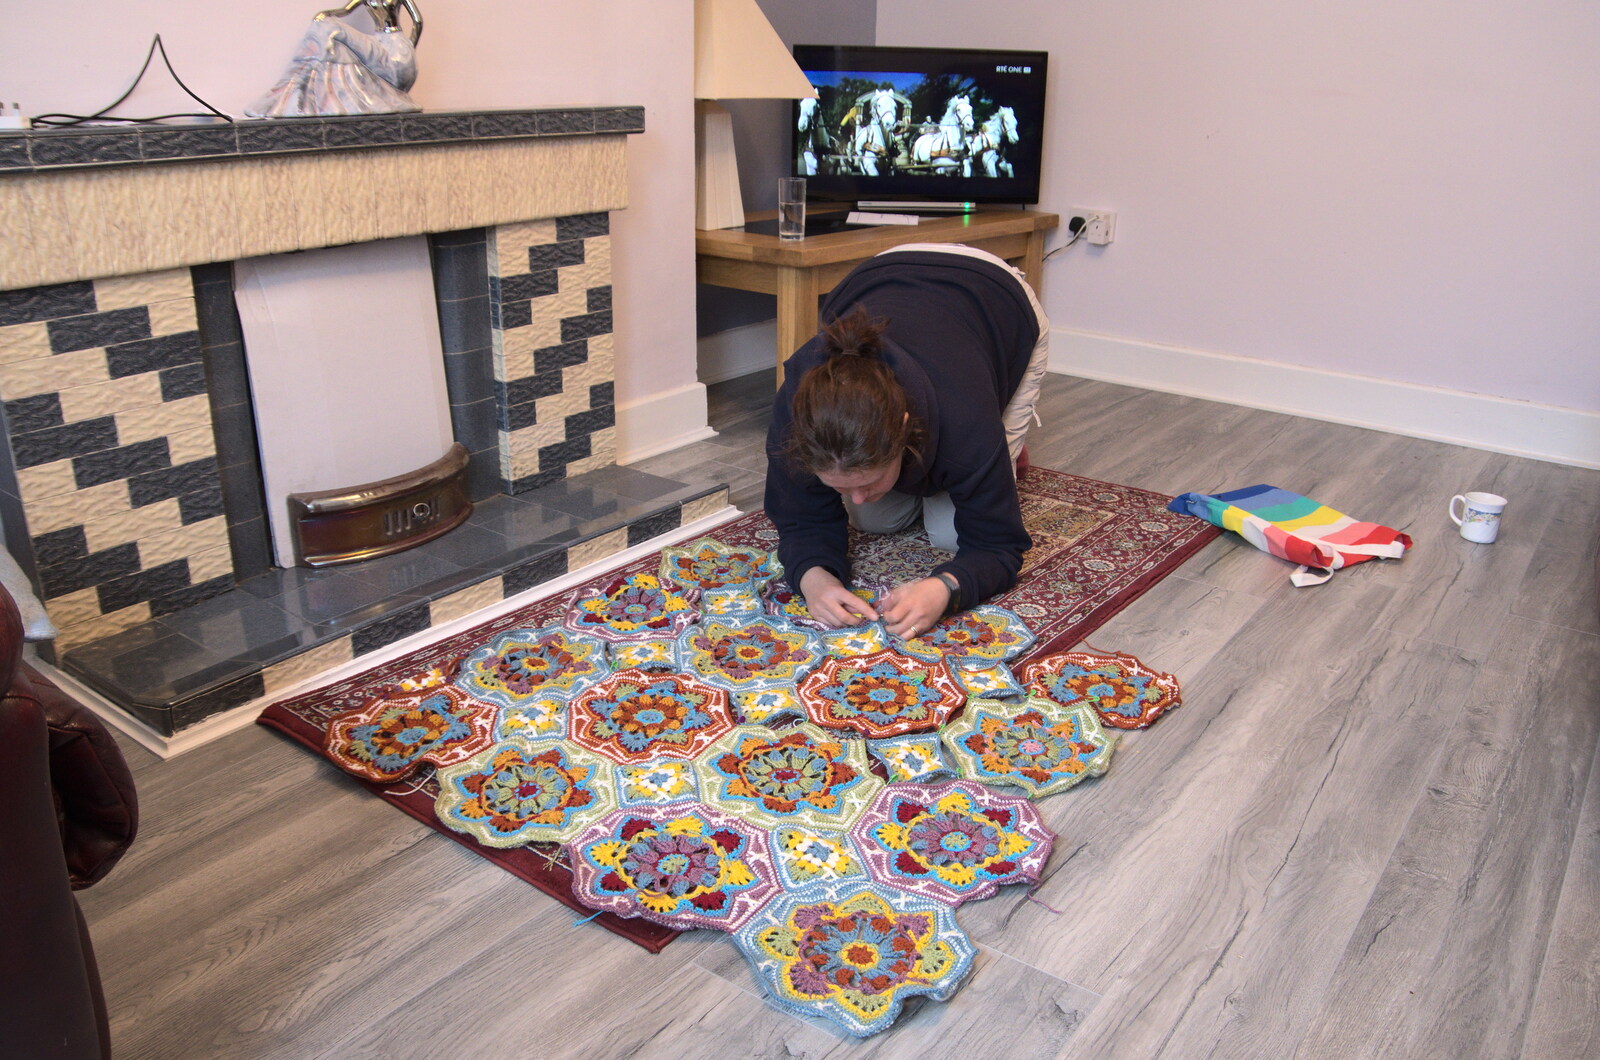 Isobel works on her crochet blanket from Manorhamilton and Bundoran, Leitrim and Donegal, Ireland - 16th April 2022